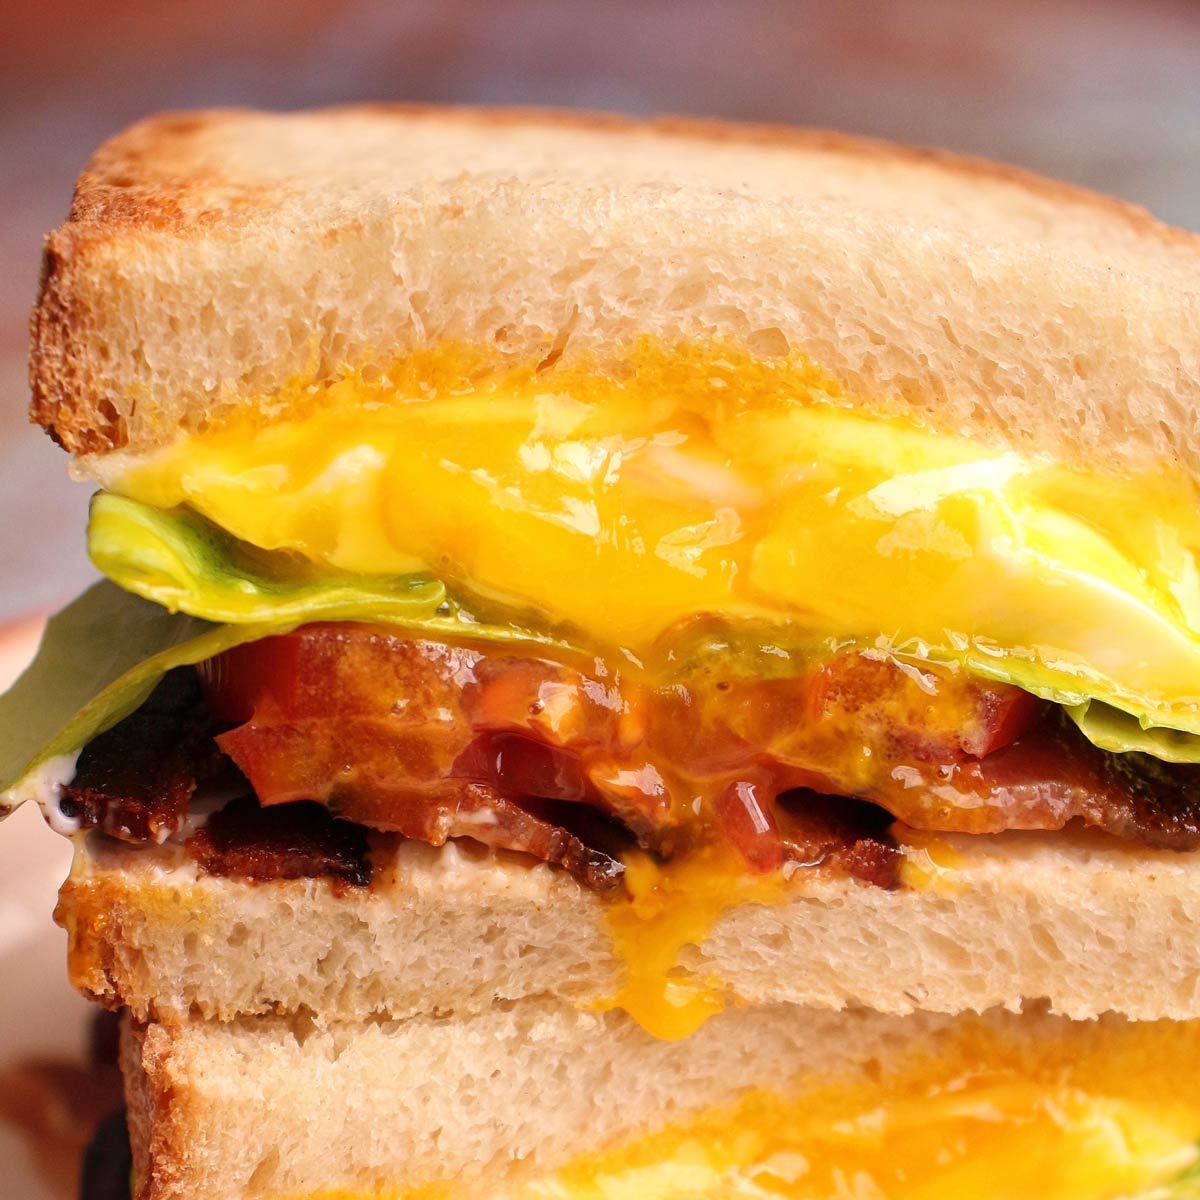 Closeup of Spanglish sandwich cross-section with runny egg yolk dripping down the front.